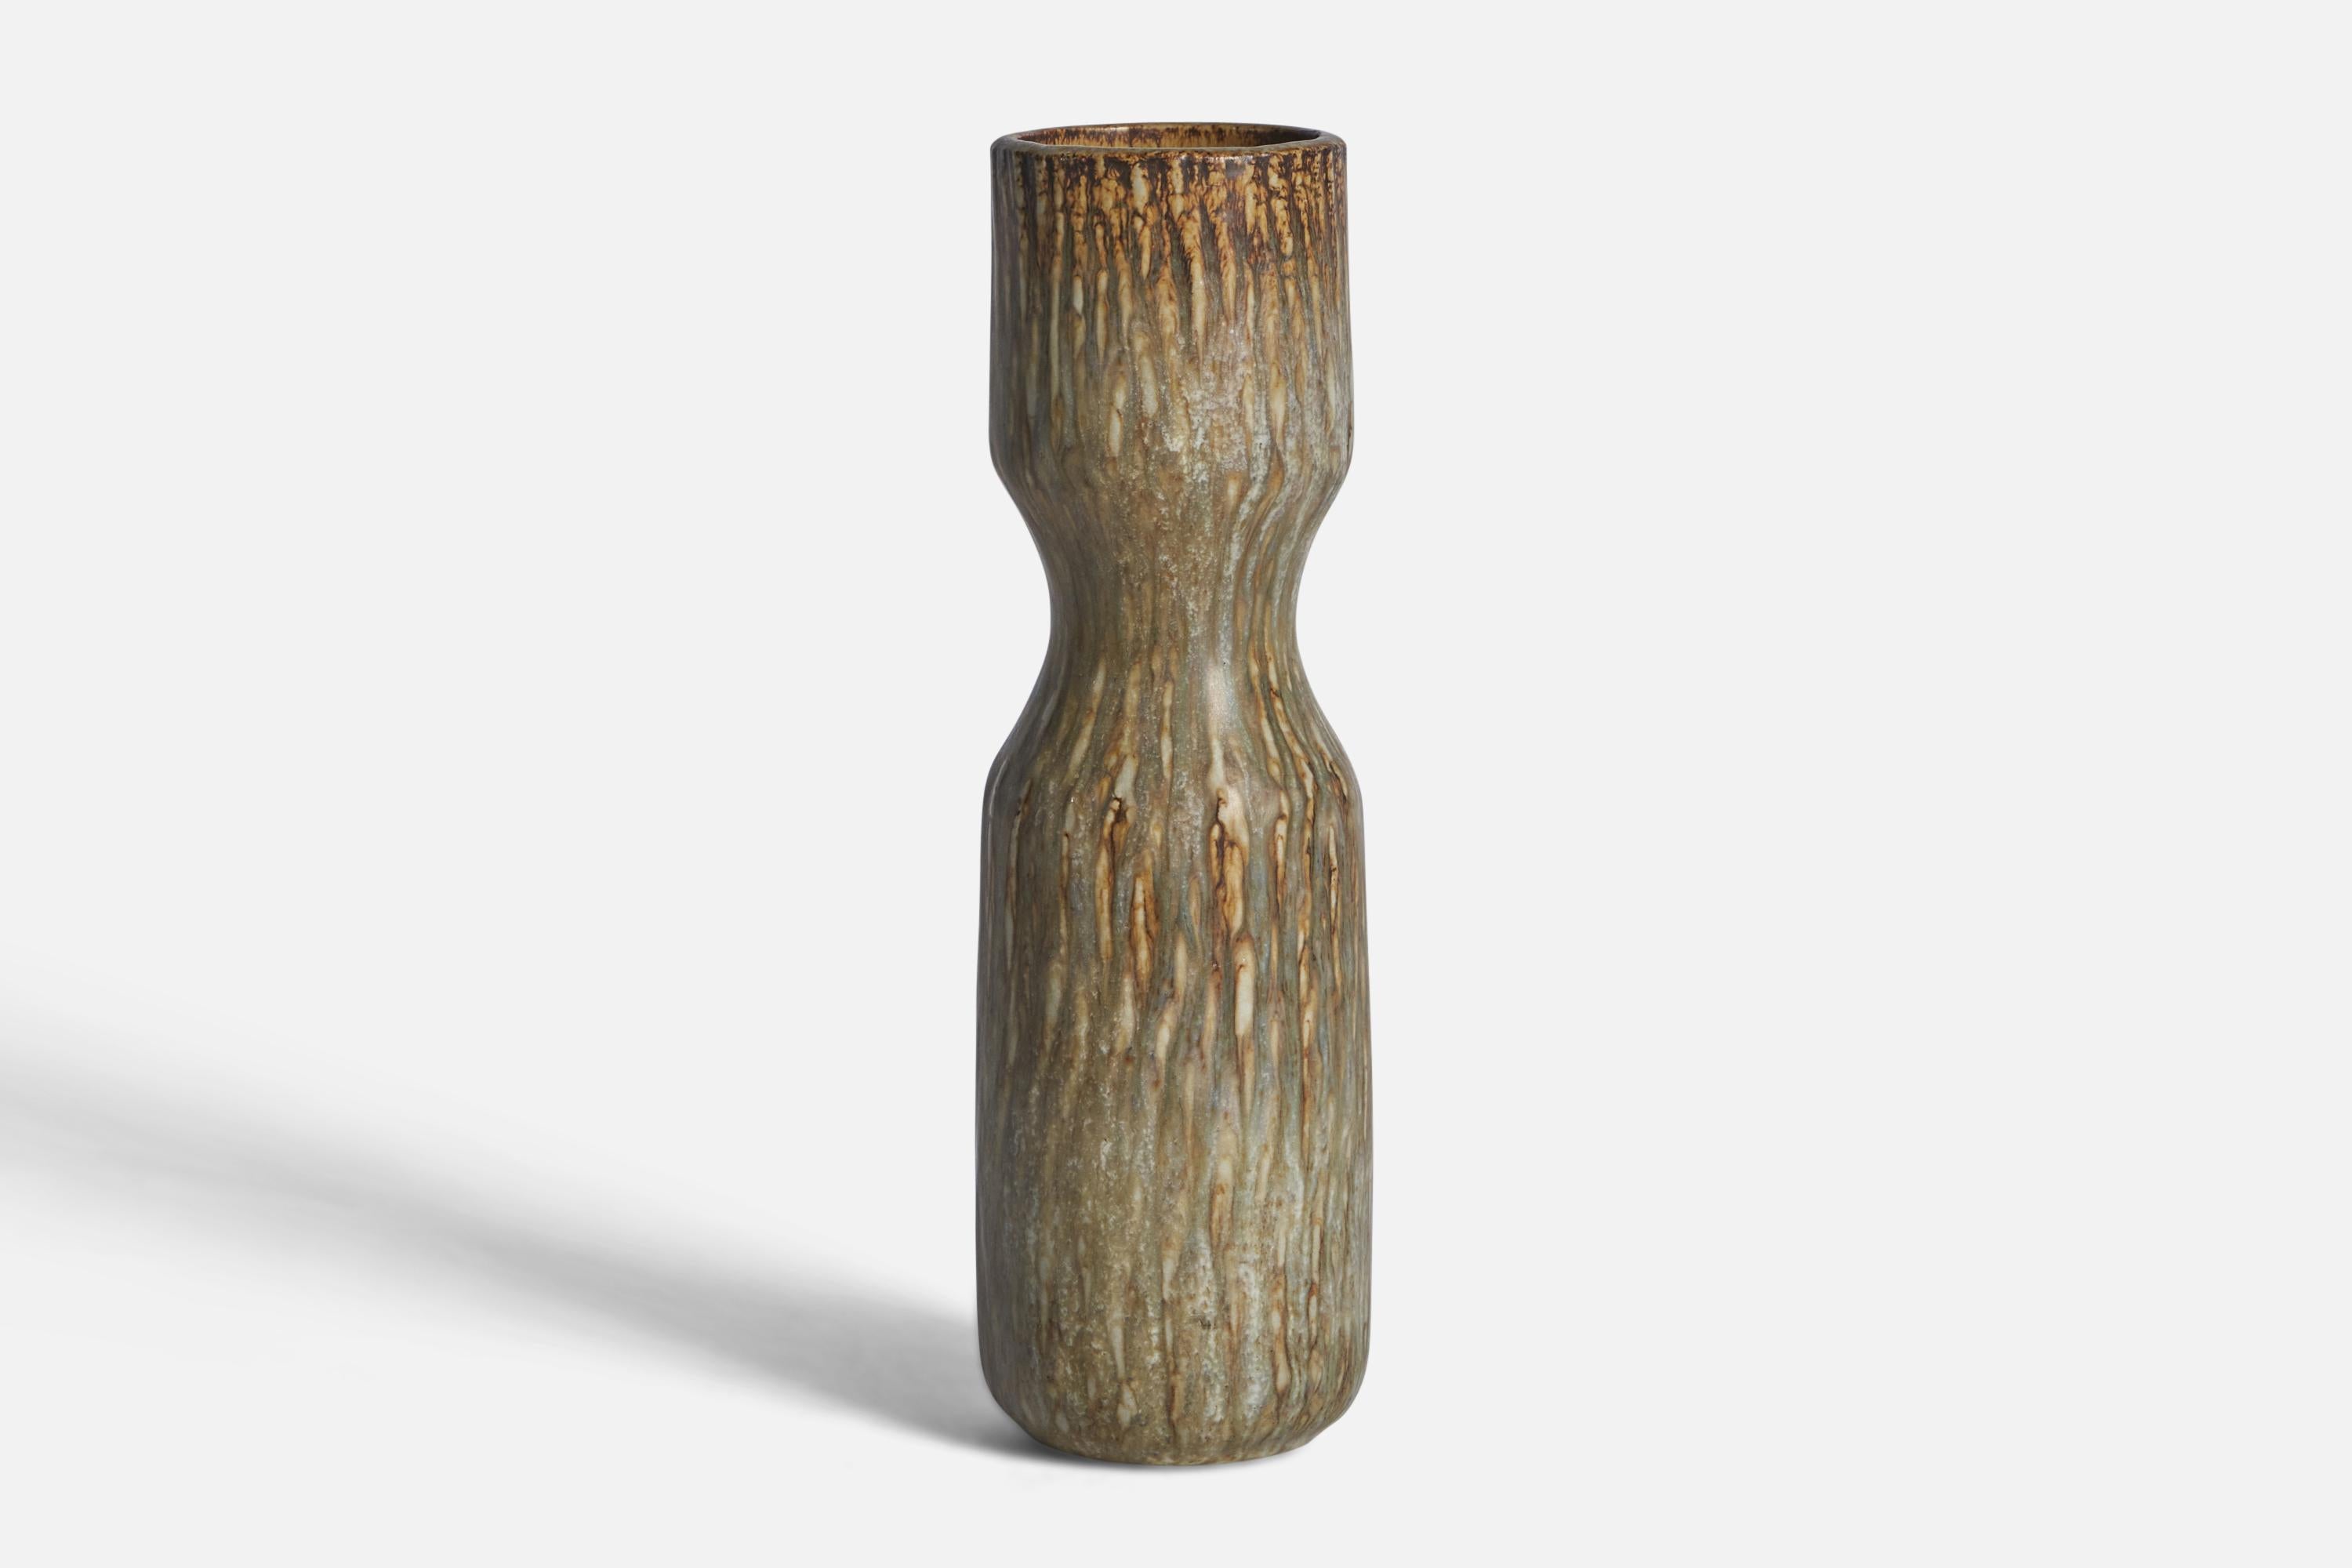 A beige, brown and grey-glazed stoneware vase designed by Gunnar Nylund and produced by Rörstrand, Sweden, 1940s.